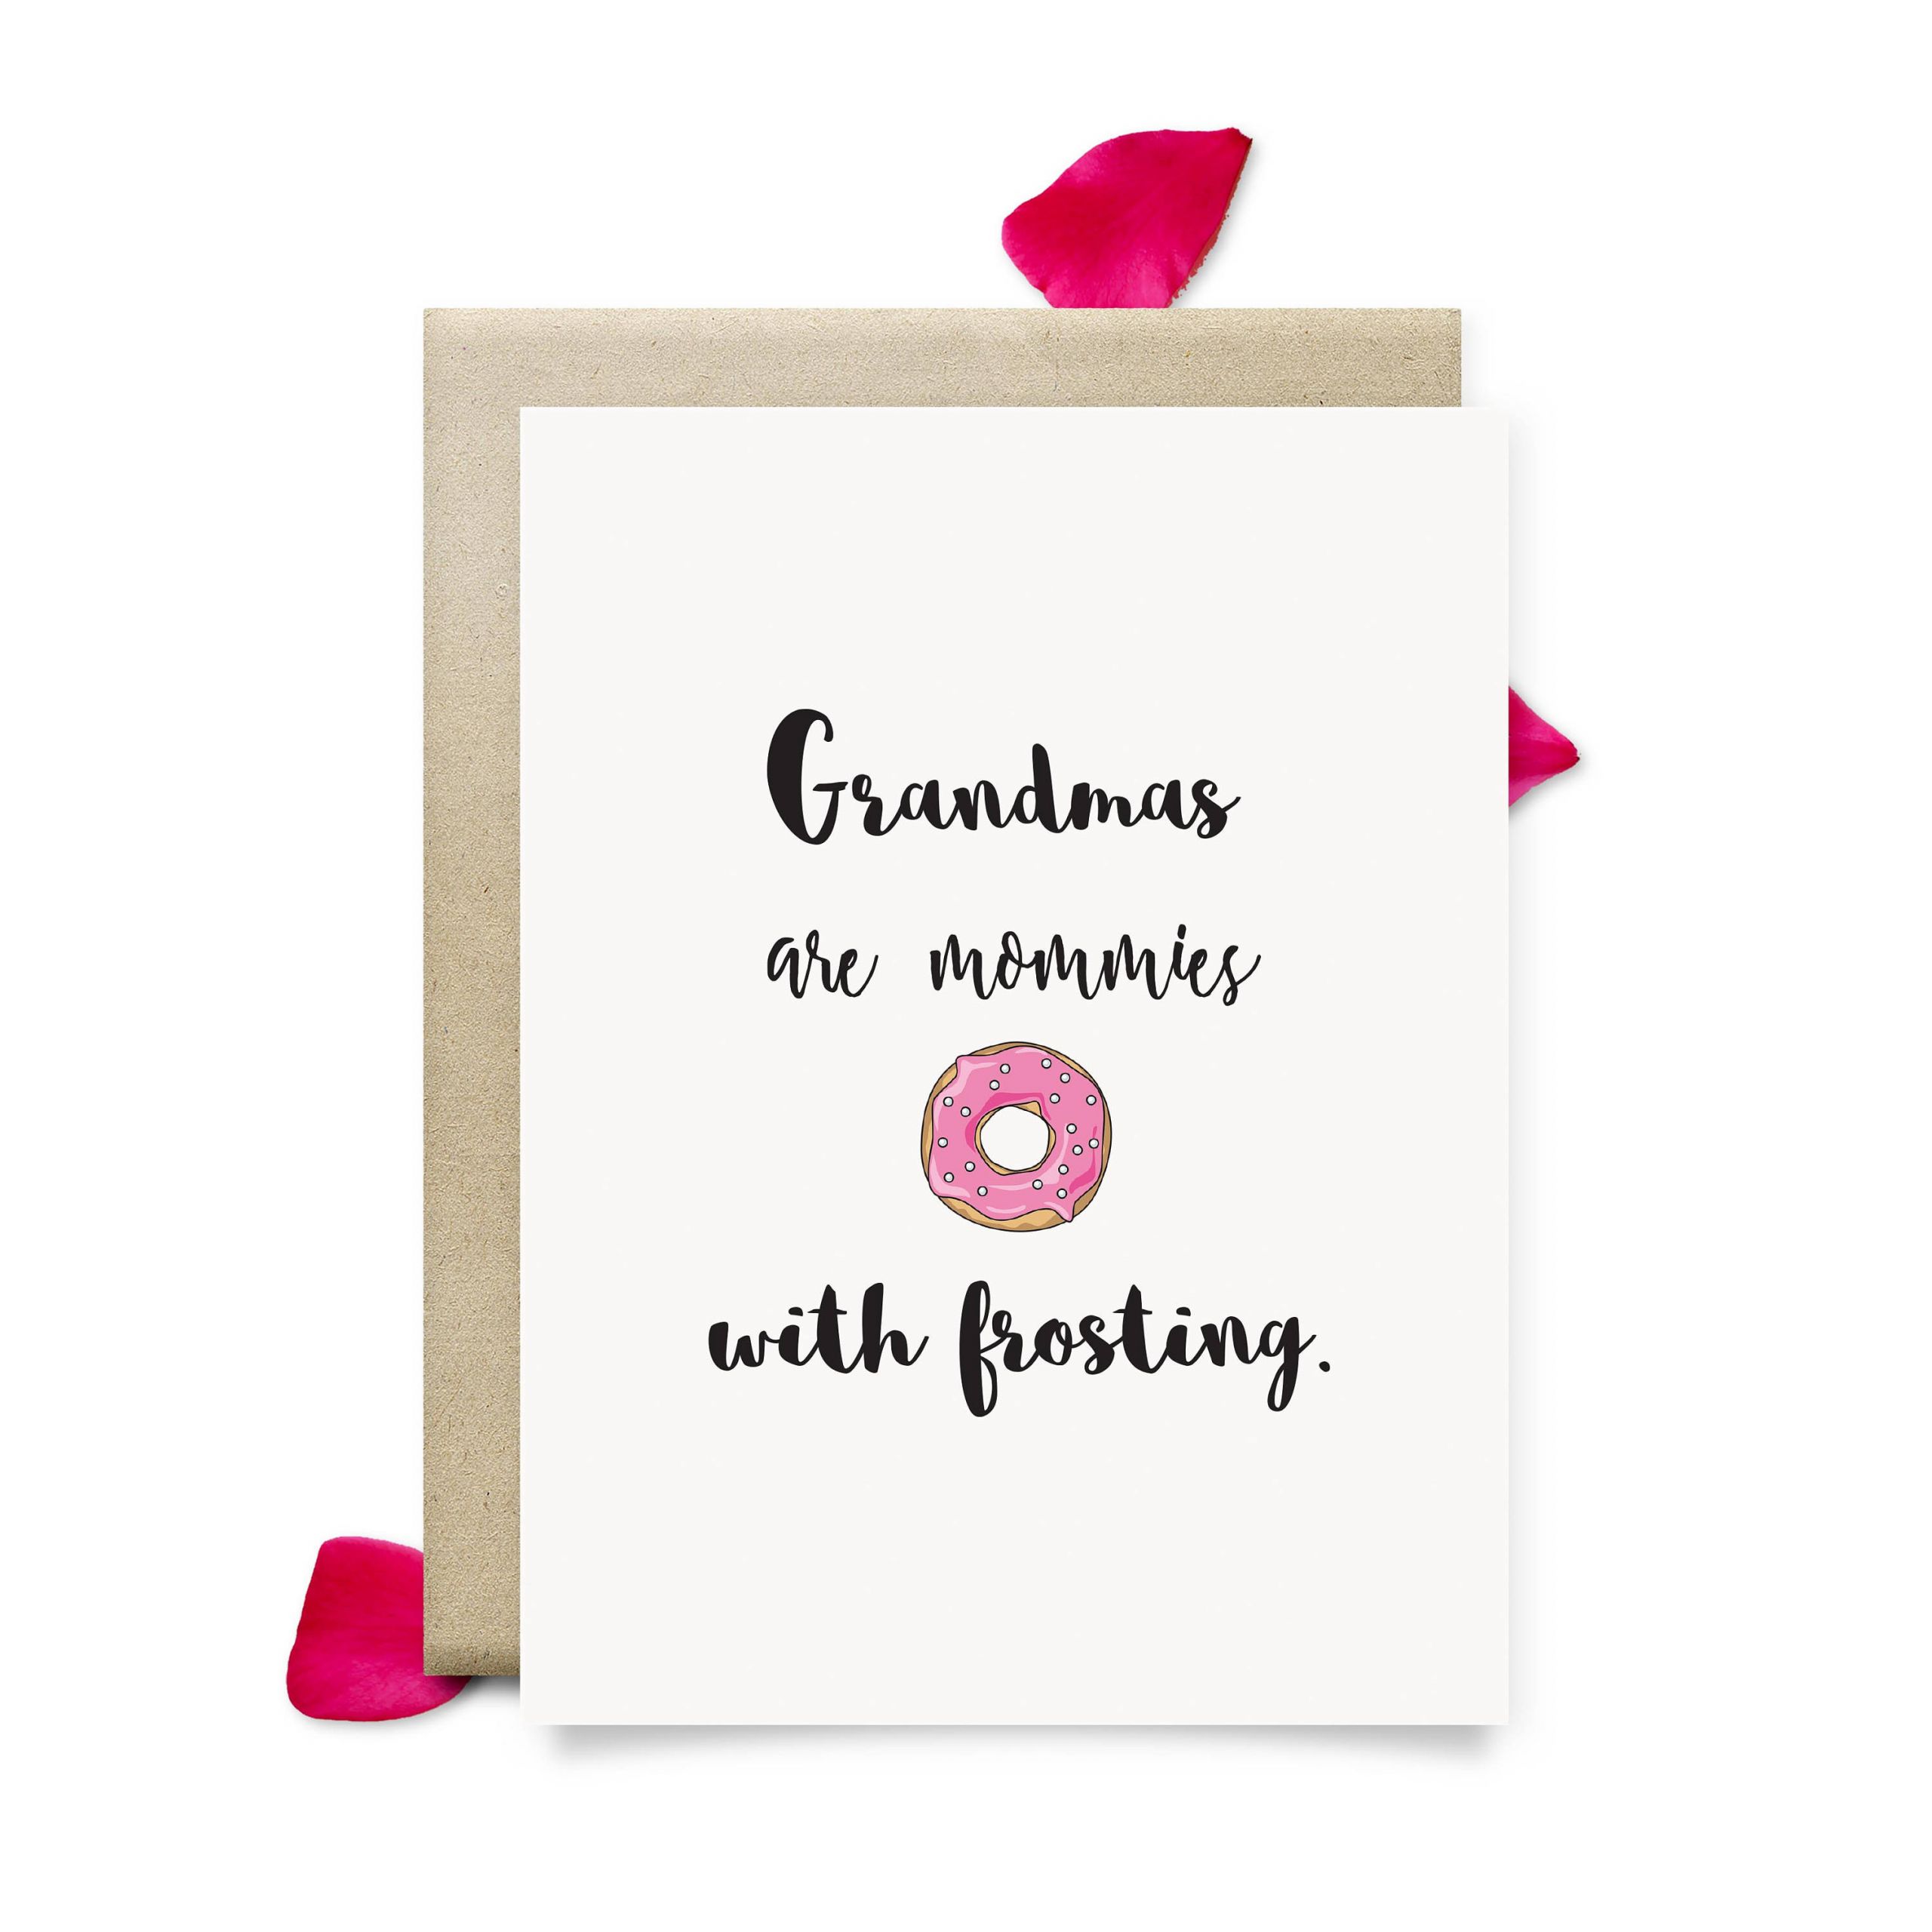 Grandma Birthday Card
 grandma birthday card cute mothers day t for grandma